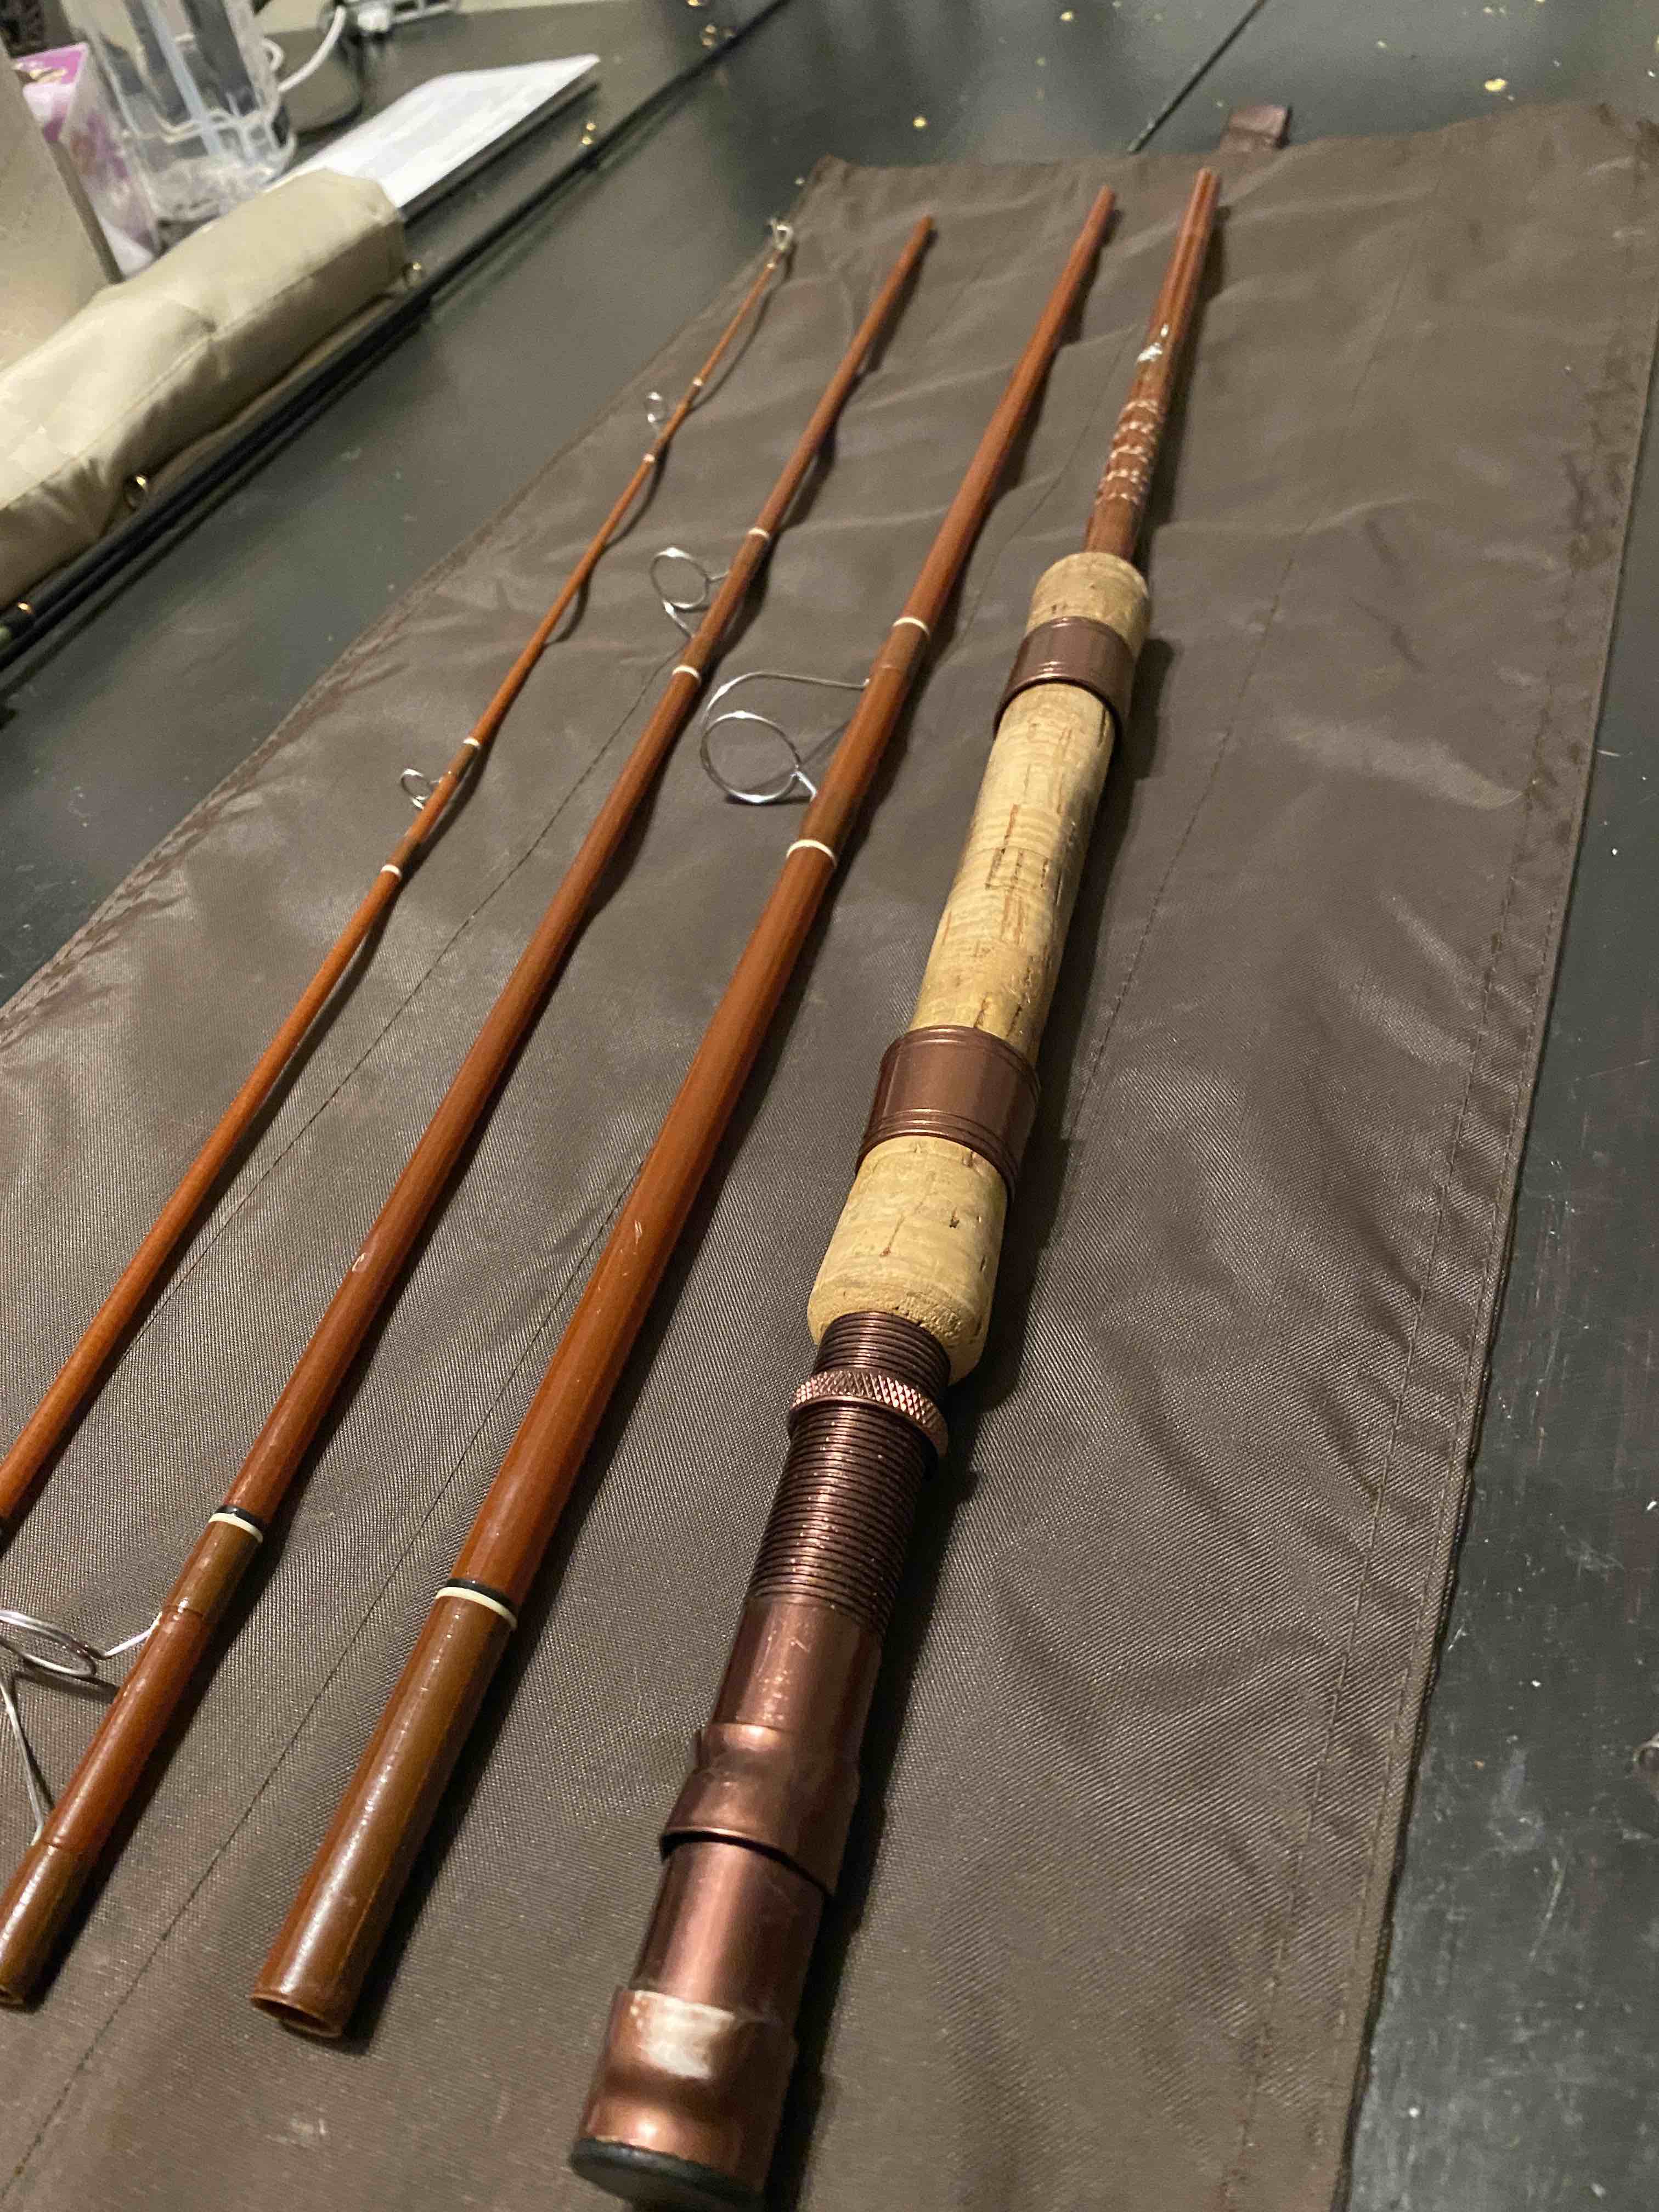 Comparing 4 Iterations of the Fenwick Voyageur SF74-4 | Fishing 